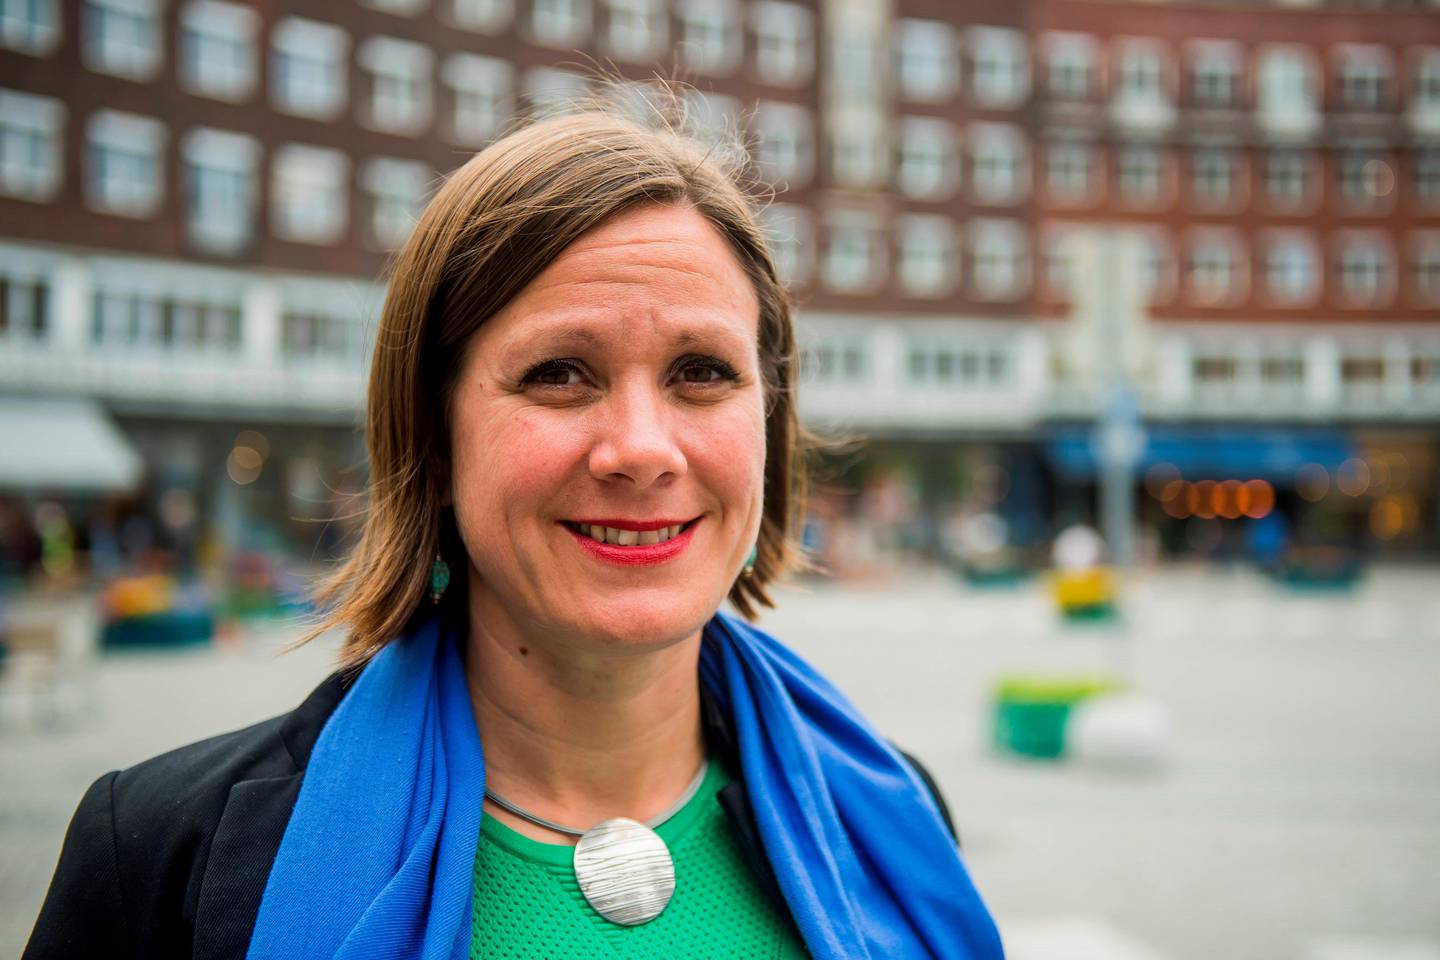 Hanna Marcussen, Greens city councillor in charge of urban development, poses for a picture on September 6, 2018 in Oslo. - Determined to go green, Oslo is slowly but surely ridding its city centre of motorists, angering some who say the "war on cars" is putting the brakes on individual freedoms. (Photo by FREDRIK VARFJELL / AFP)